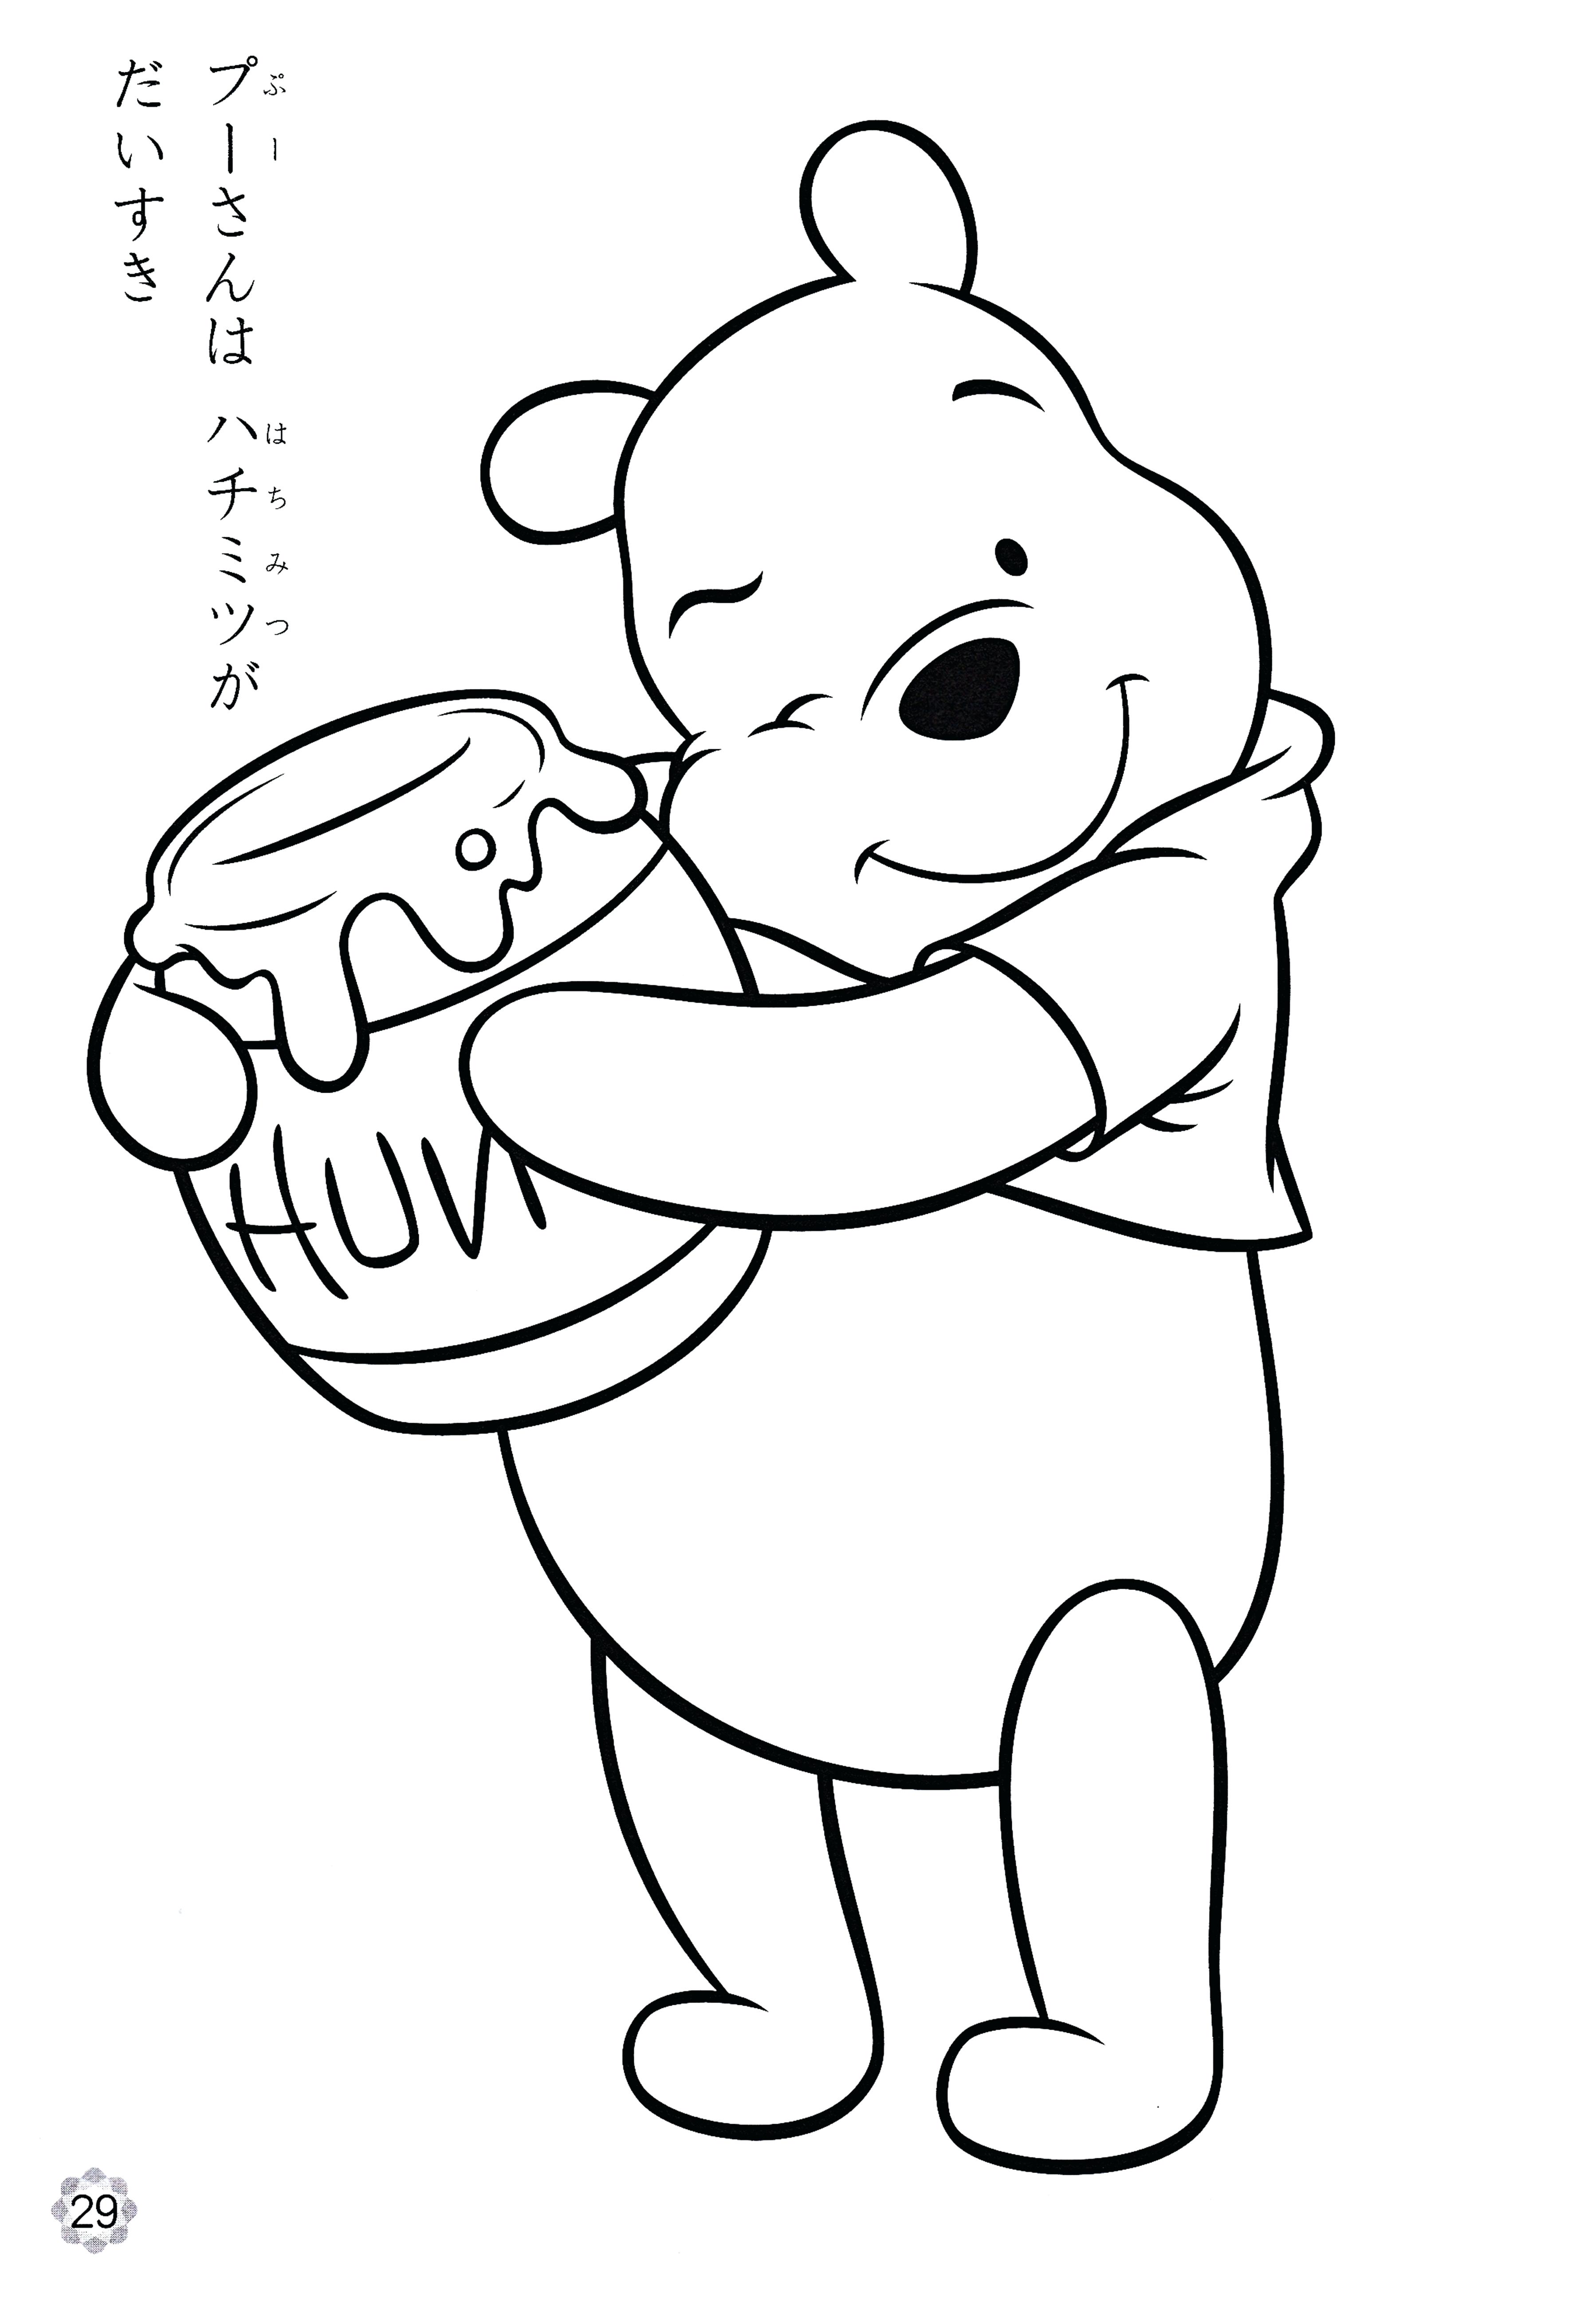 Winnie The Pooh Drawings Easy Google Image Result for http//images